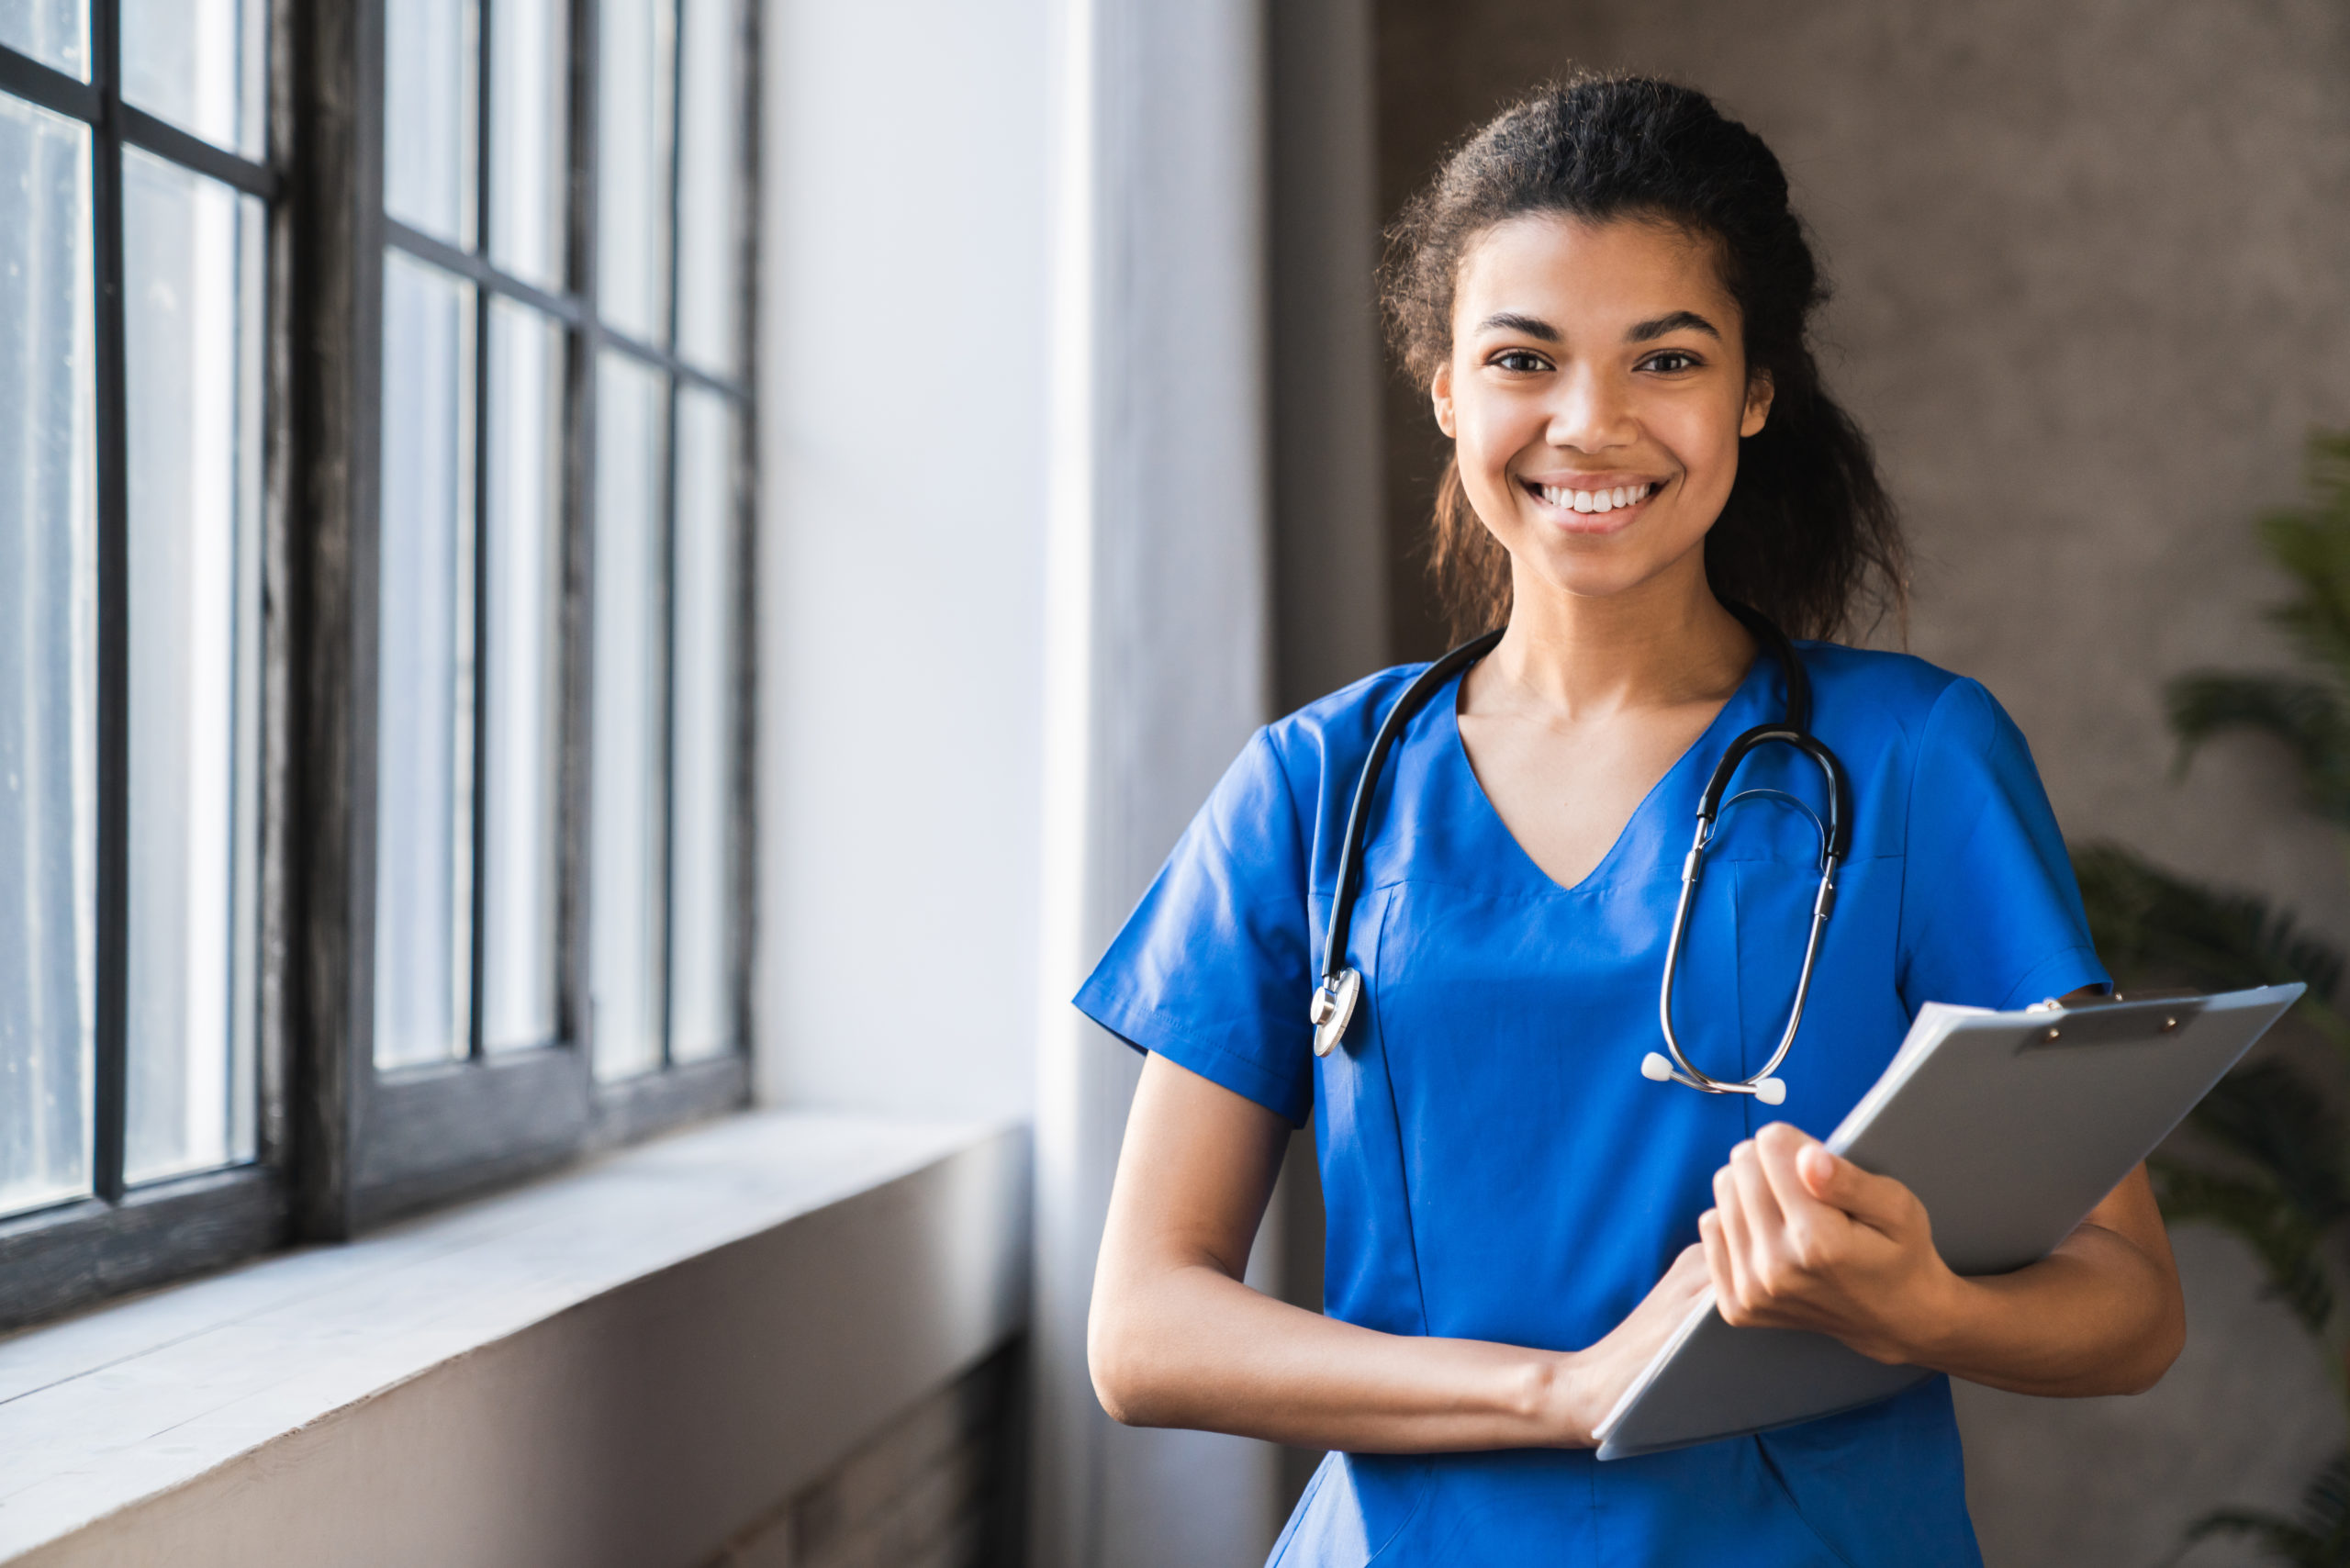 A nursing assistant smiles with a clipboard in hand and stethoscope around her neck.